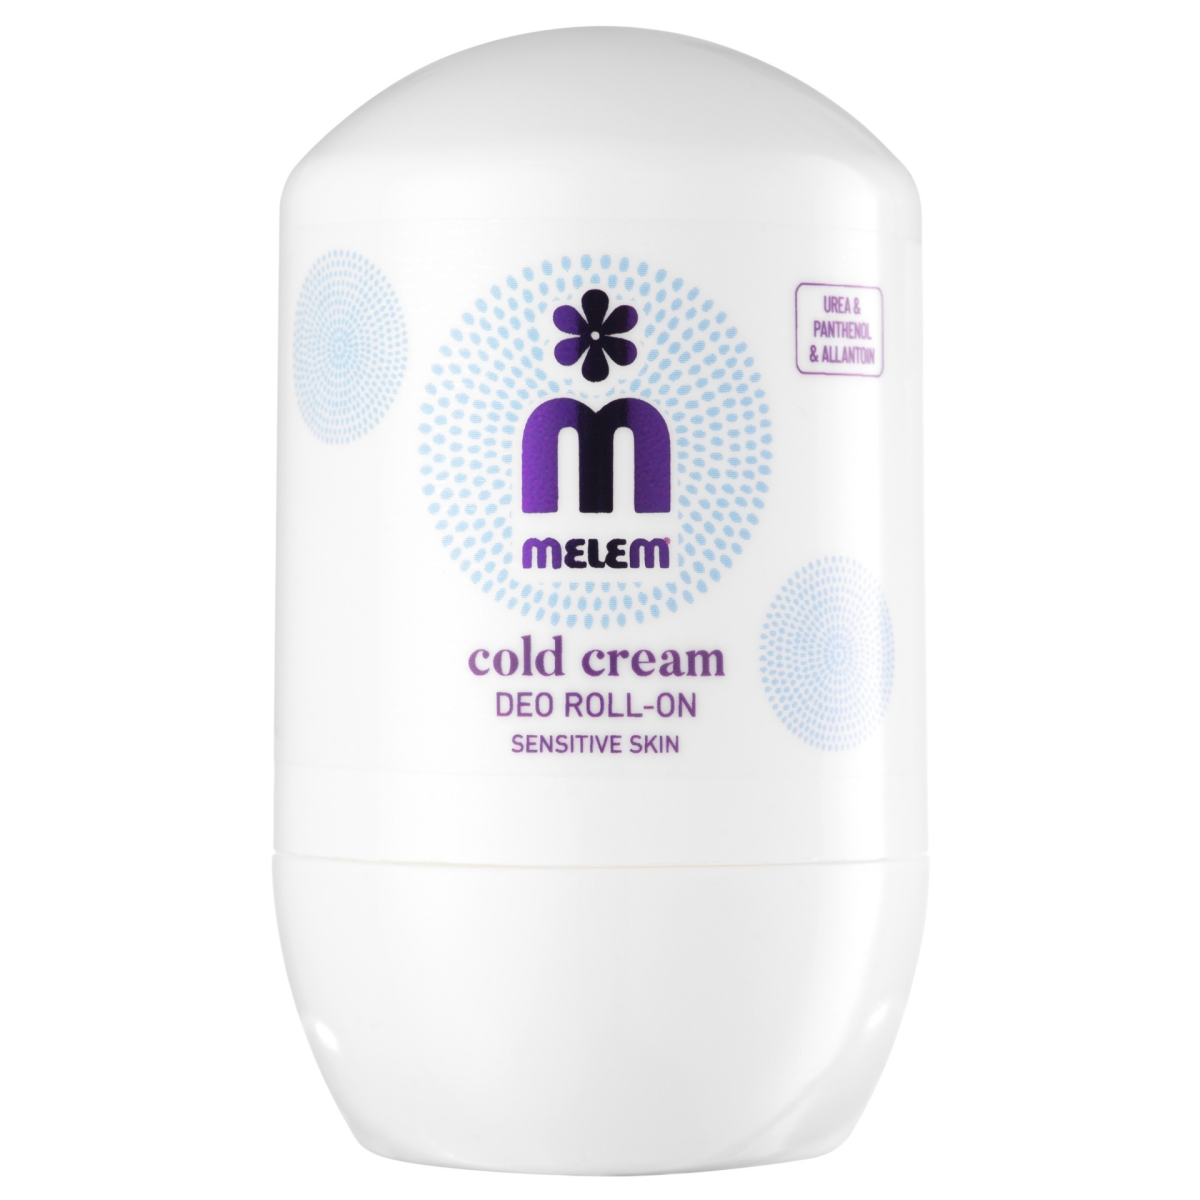 Melem Cold Cream Deo Roll-on